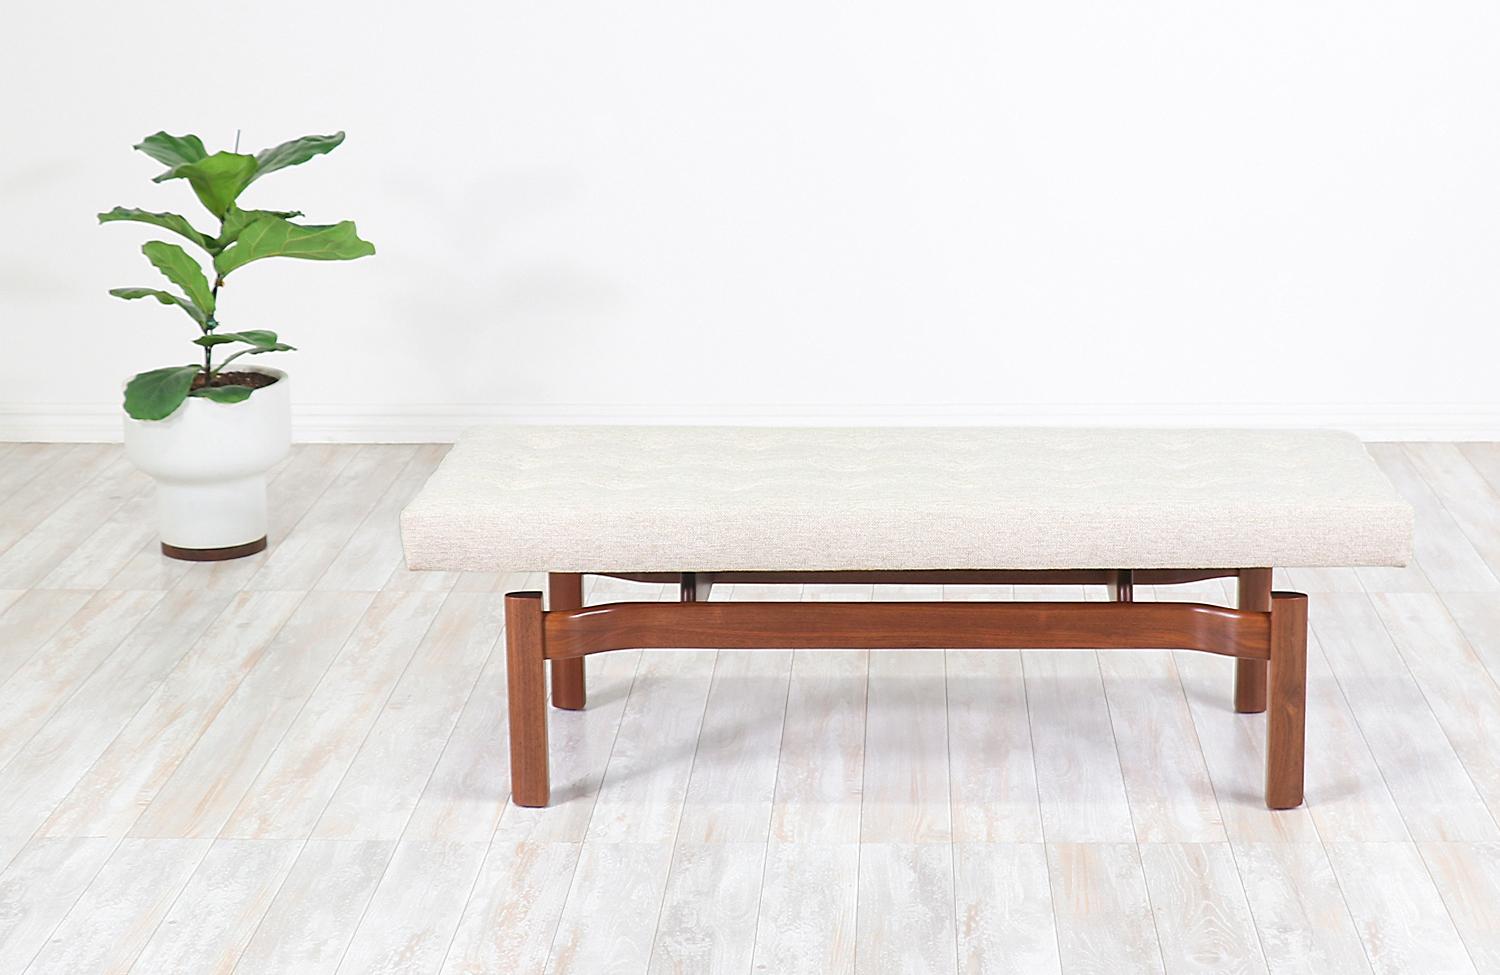 Sculpted Mid-Century Modern bench designed and manufactured in the United States, circa 1950s. This elegantly carved bench features a solid walnut wood base with a long cushion held by two perpendicular stretchers in a way that makes it seem like a